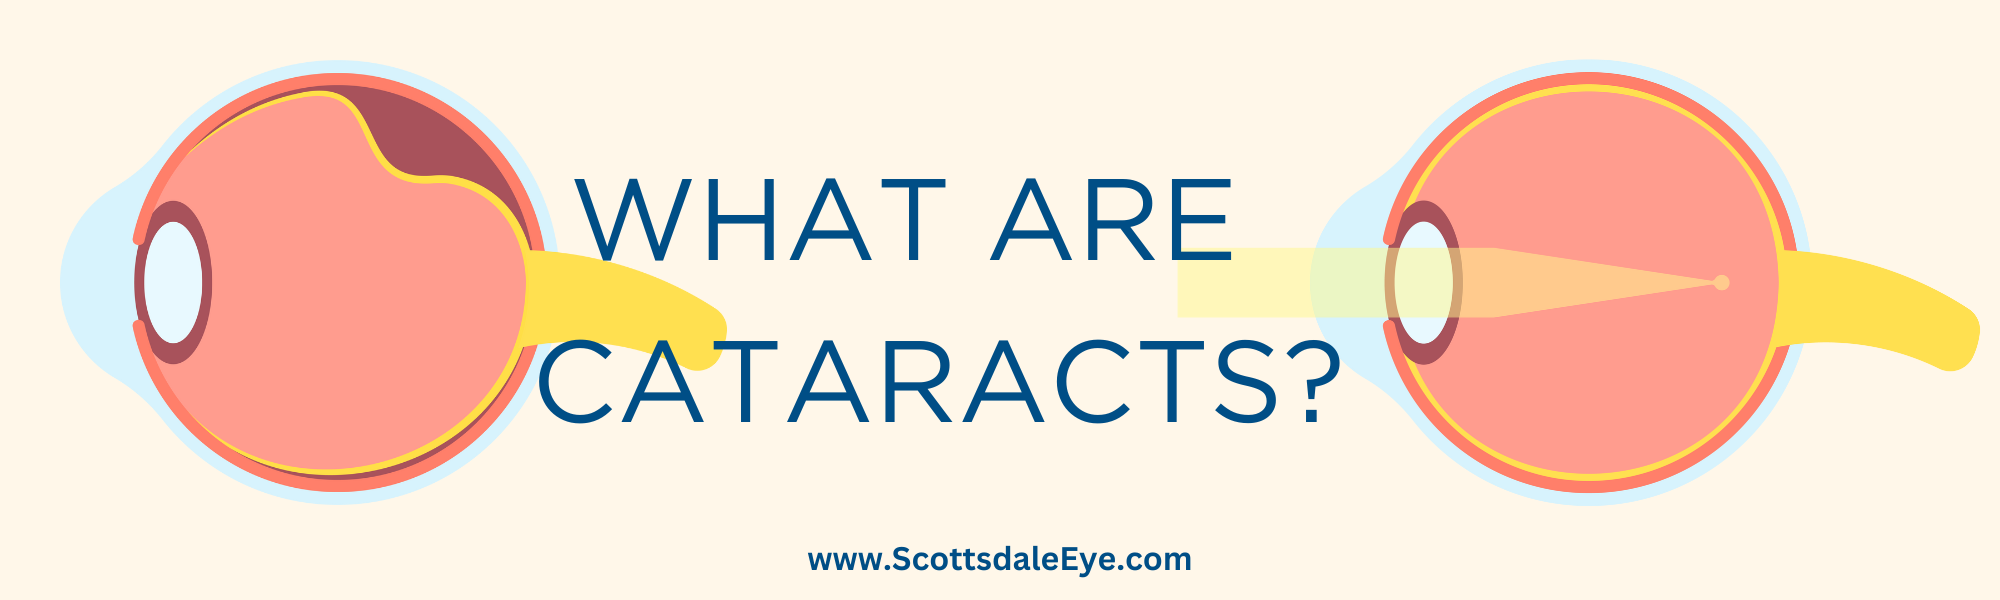 Understanding the Effects of Cataracts on Your Eyes